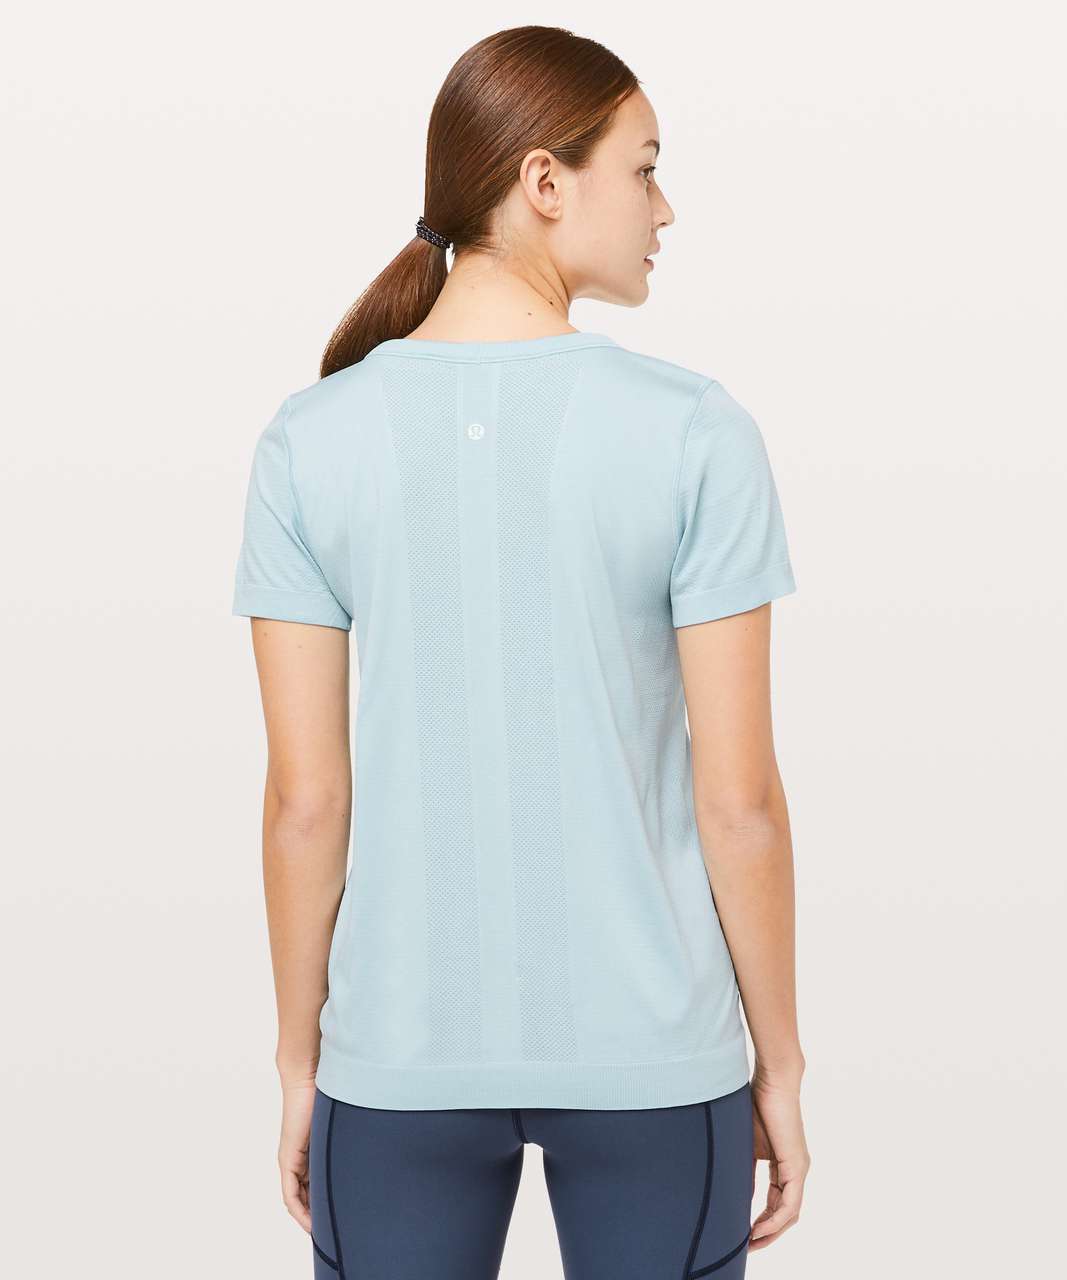 Lululemon Swiftly Tech Short Sleeve (Breeze) *Relaxed Fit - White